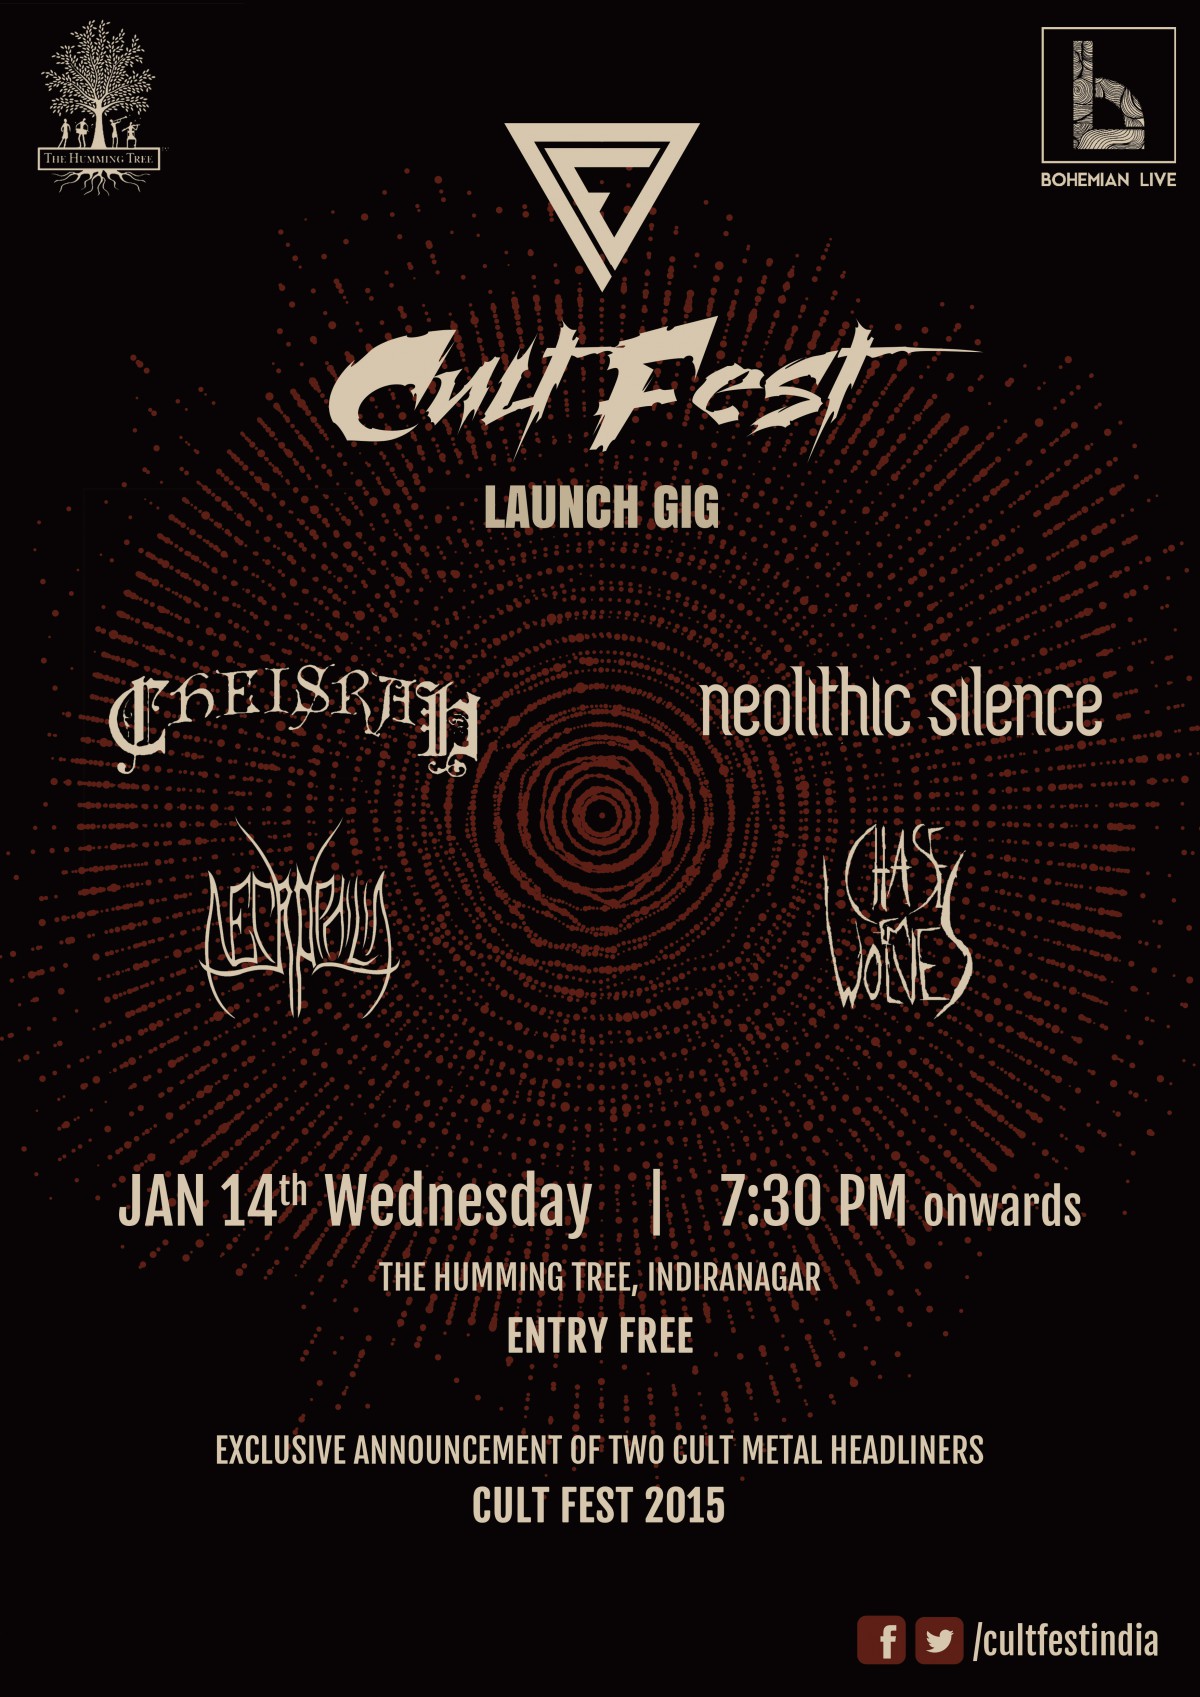 Cultfest--launch-gig-poster